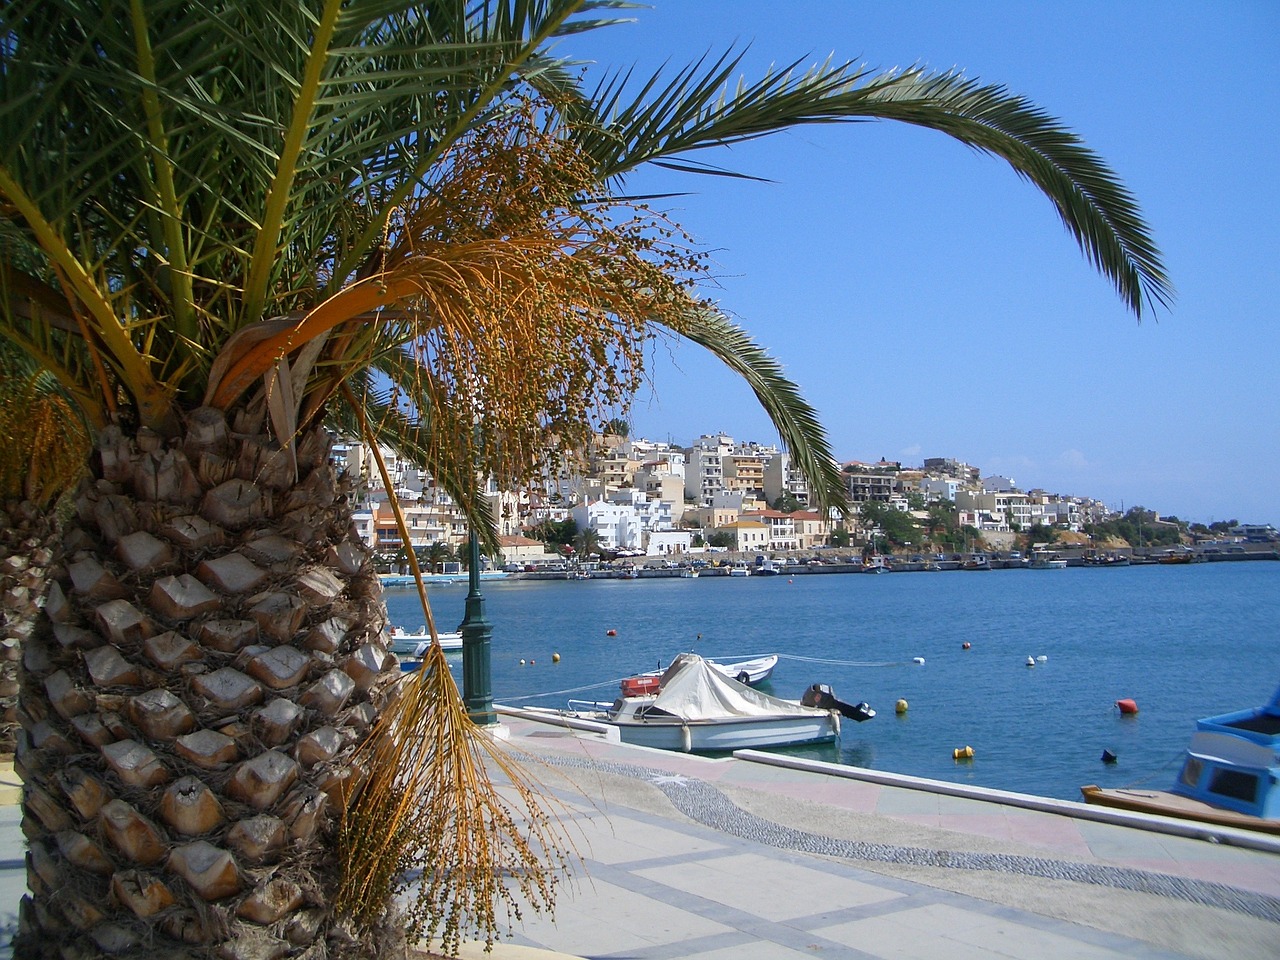 Greece Travel Secrets discovers Sitia, the main town in eastern Crete, with its relaxing waterfront, inexpensive hotels, good food, and nearby ancient sites.